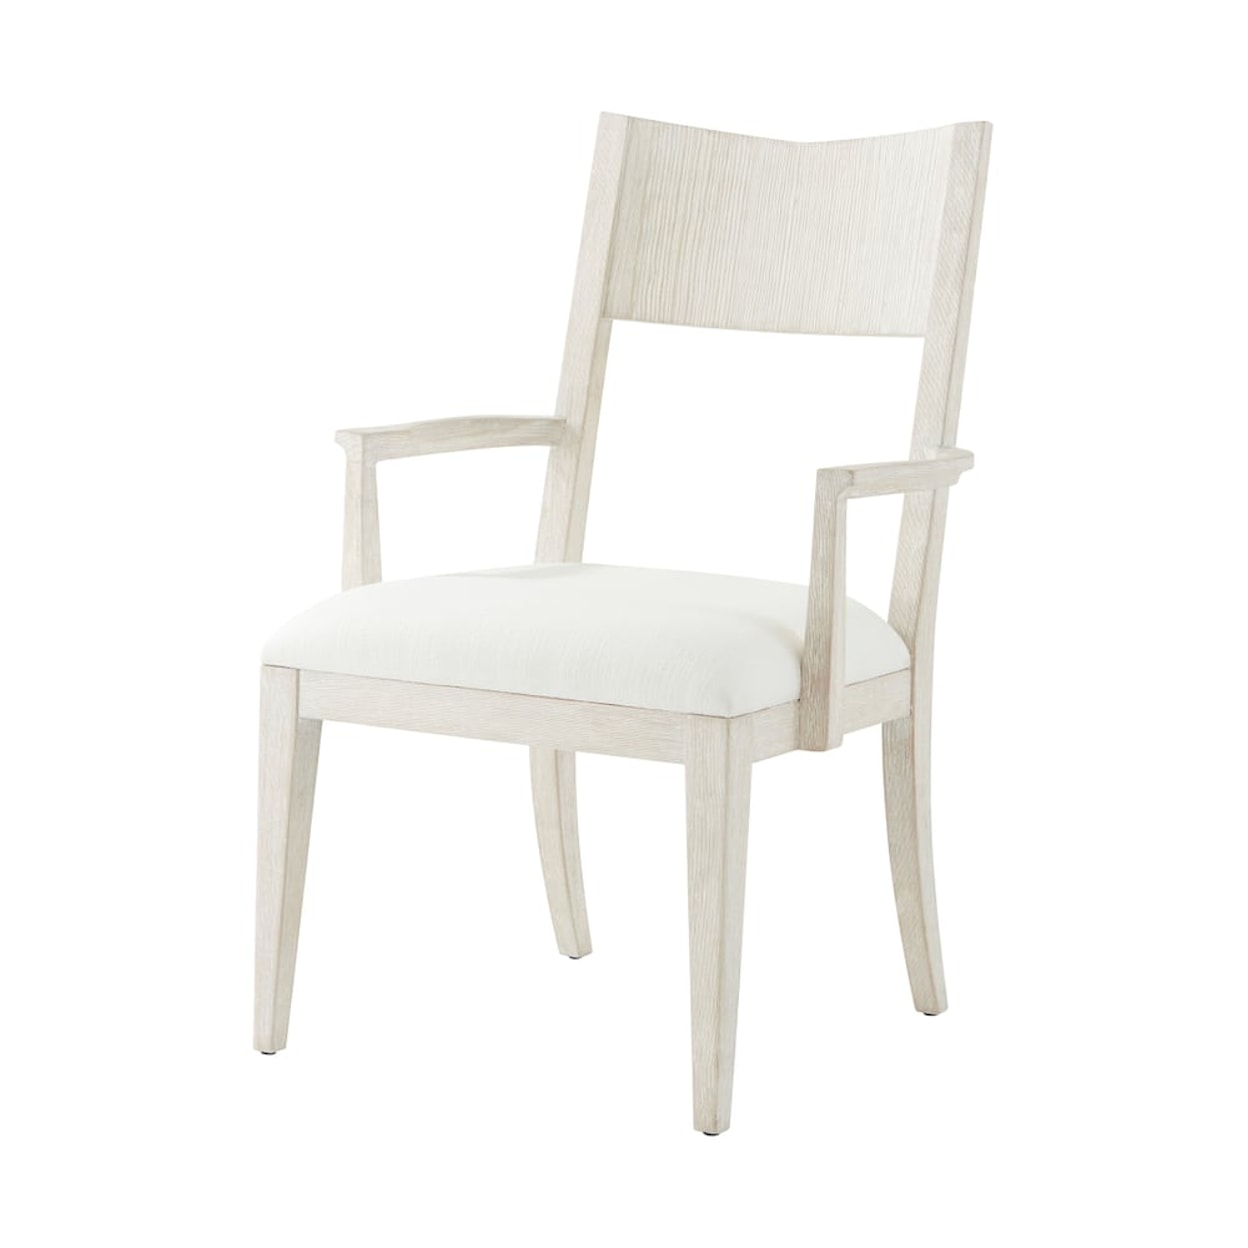 Theodore Alexander Breeze Arm Chair with Upholstered Cushion